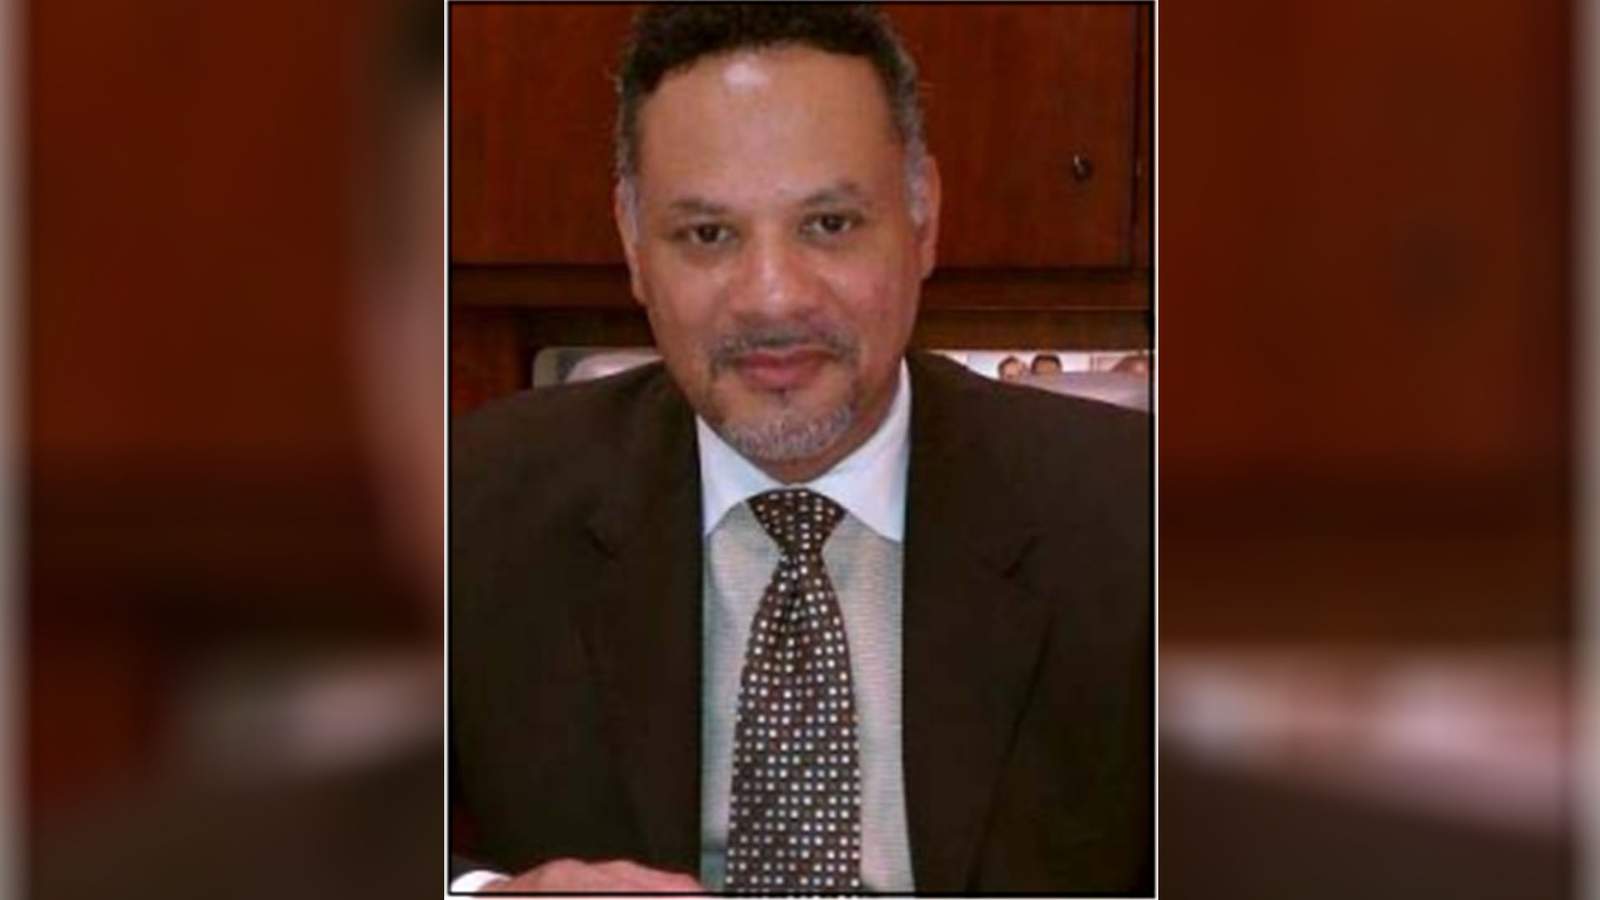 Warrant issued for arrest of former TSU law school assistant dean charged with theft in alleged admissions scheme, source says